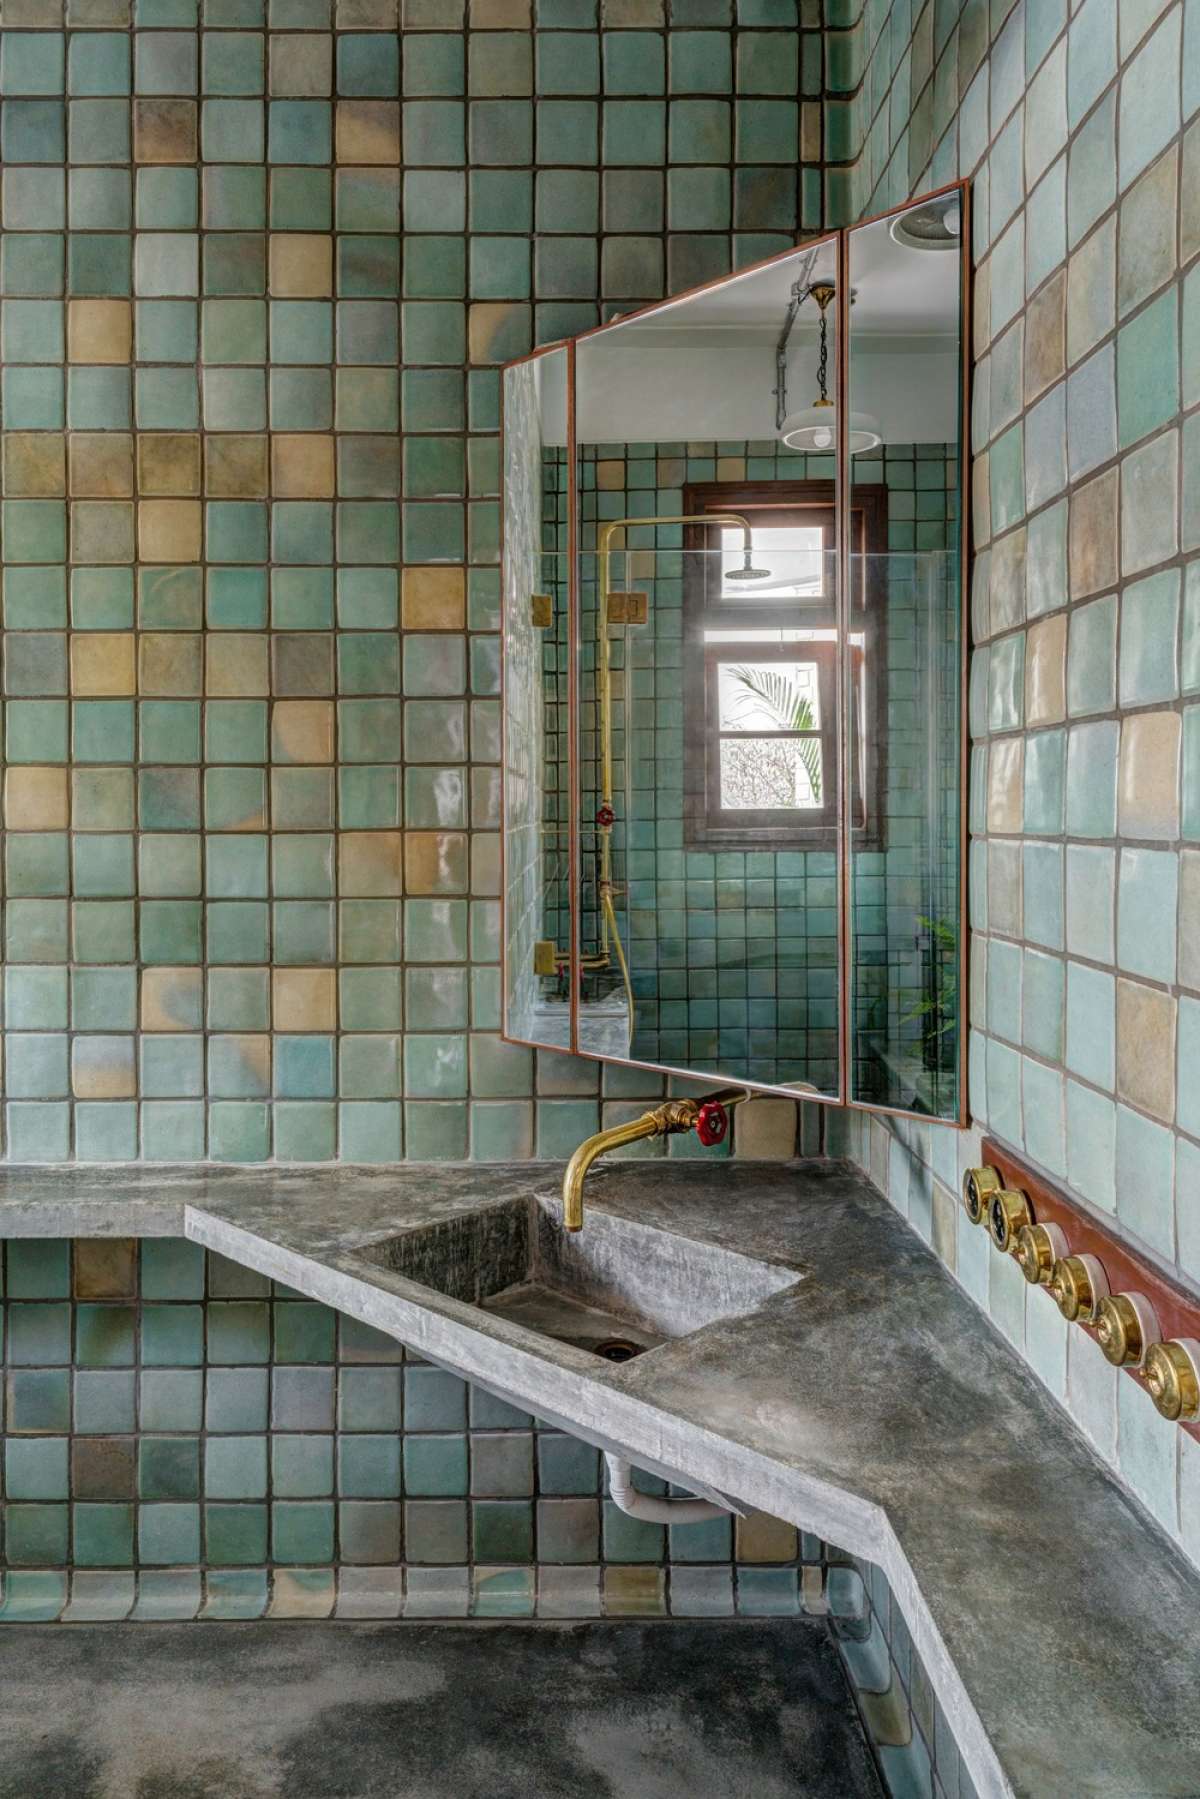 Guest Bathroom - Handmade curved tiles laid in place with brass-ware and concrete counter-top.